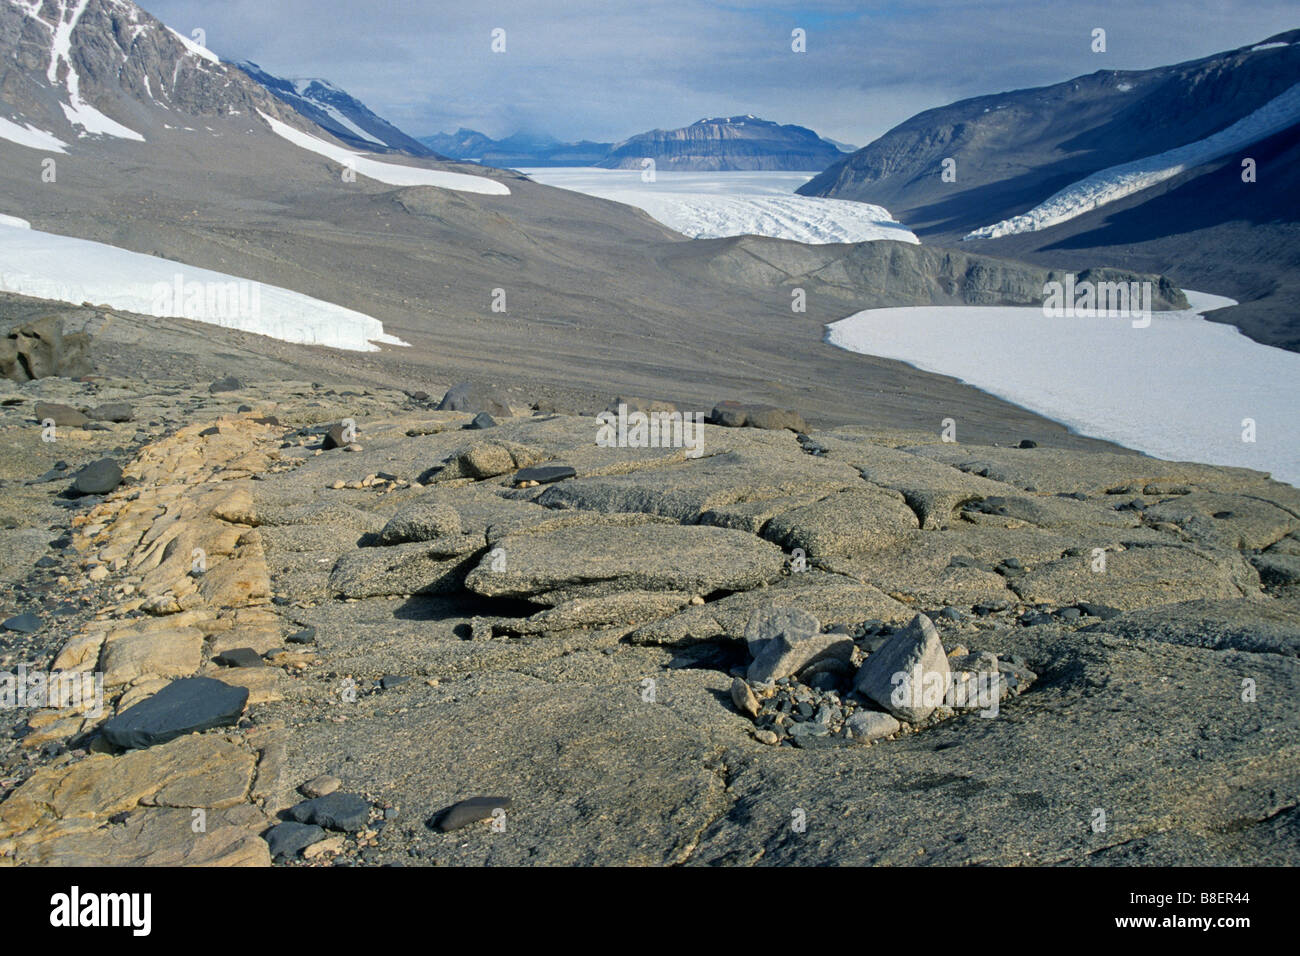 The scenic view above Lake Bonney in the Dry Valleys, Antarctica. Stock Photo